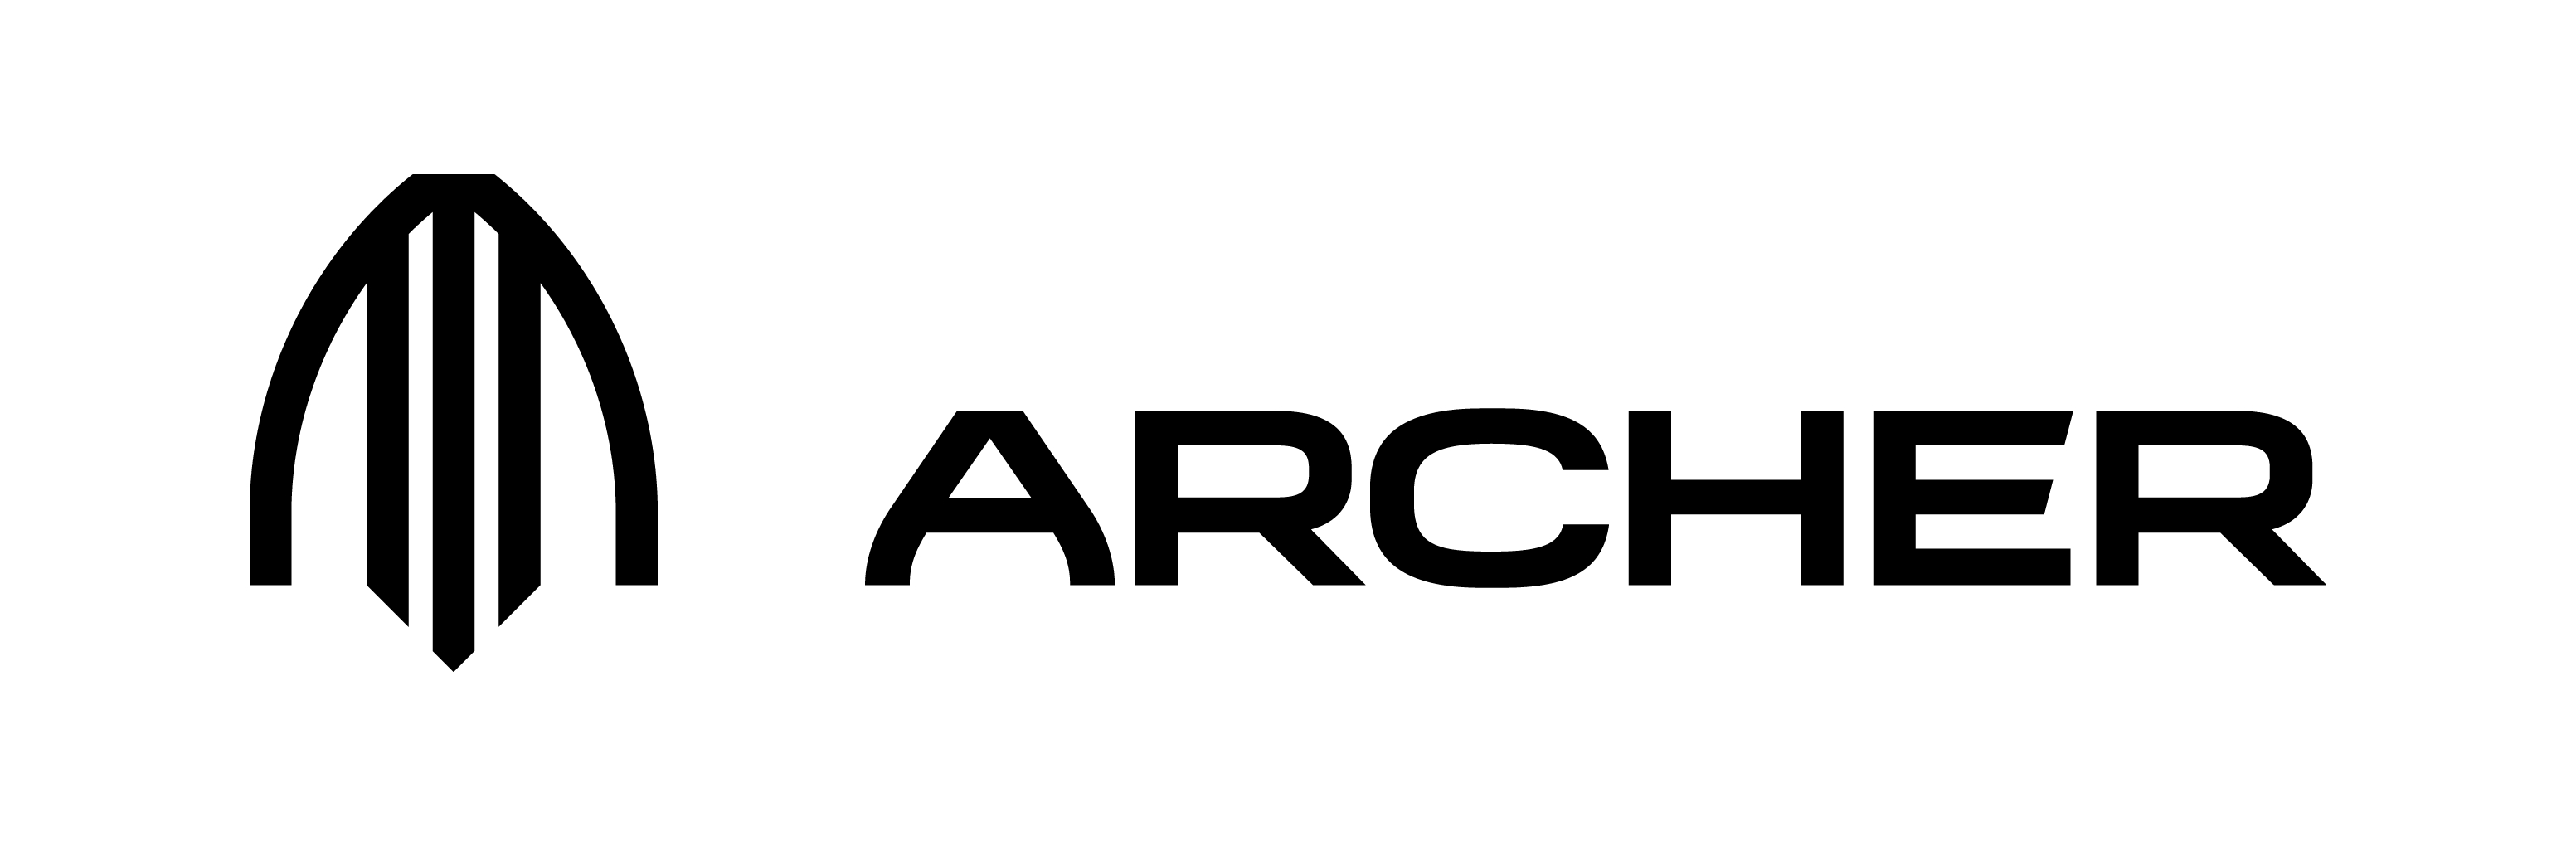 Archer Aviation Receives $10 Million Pre-Payment from United